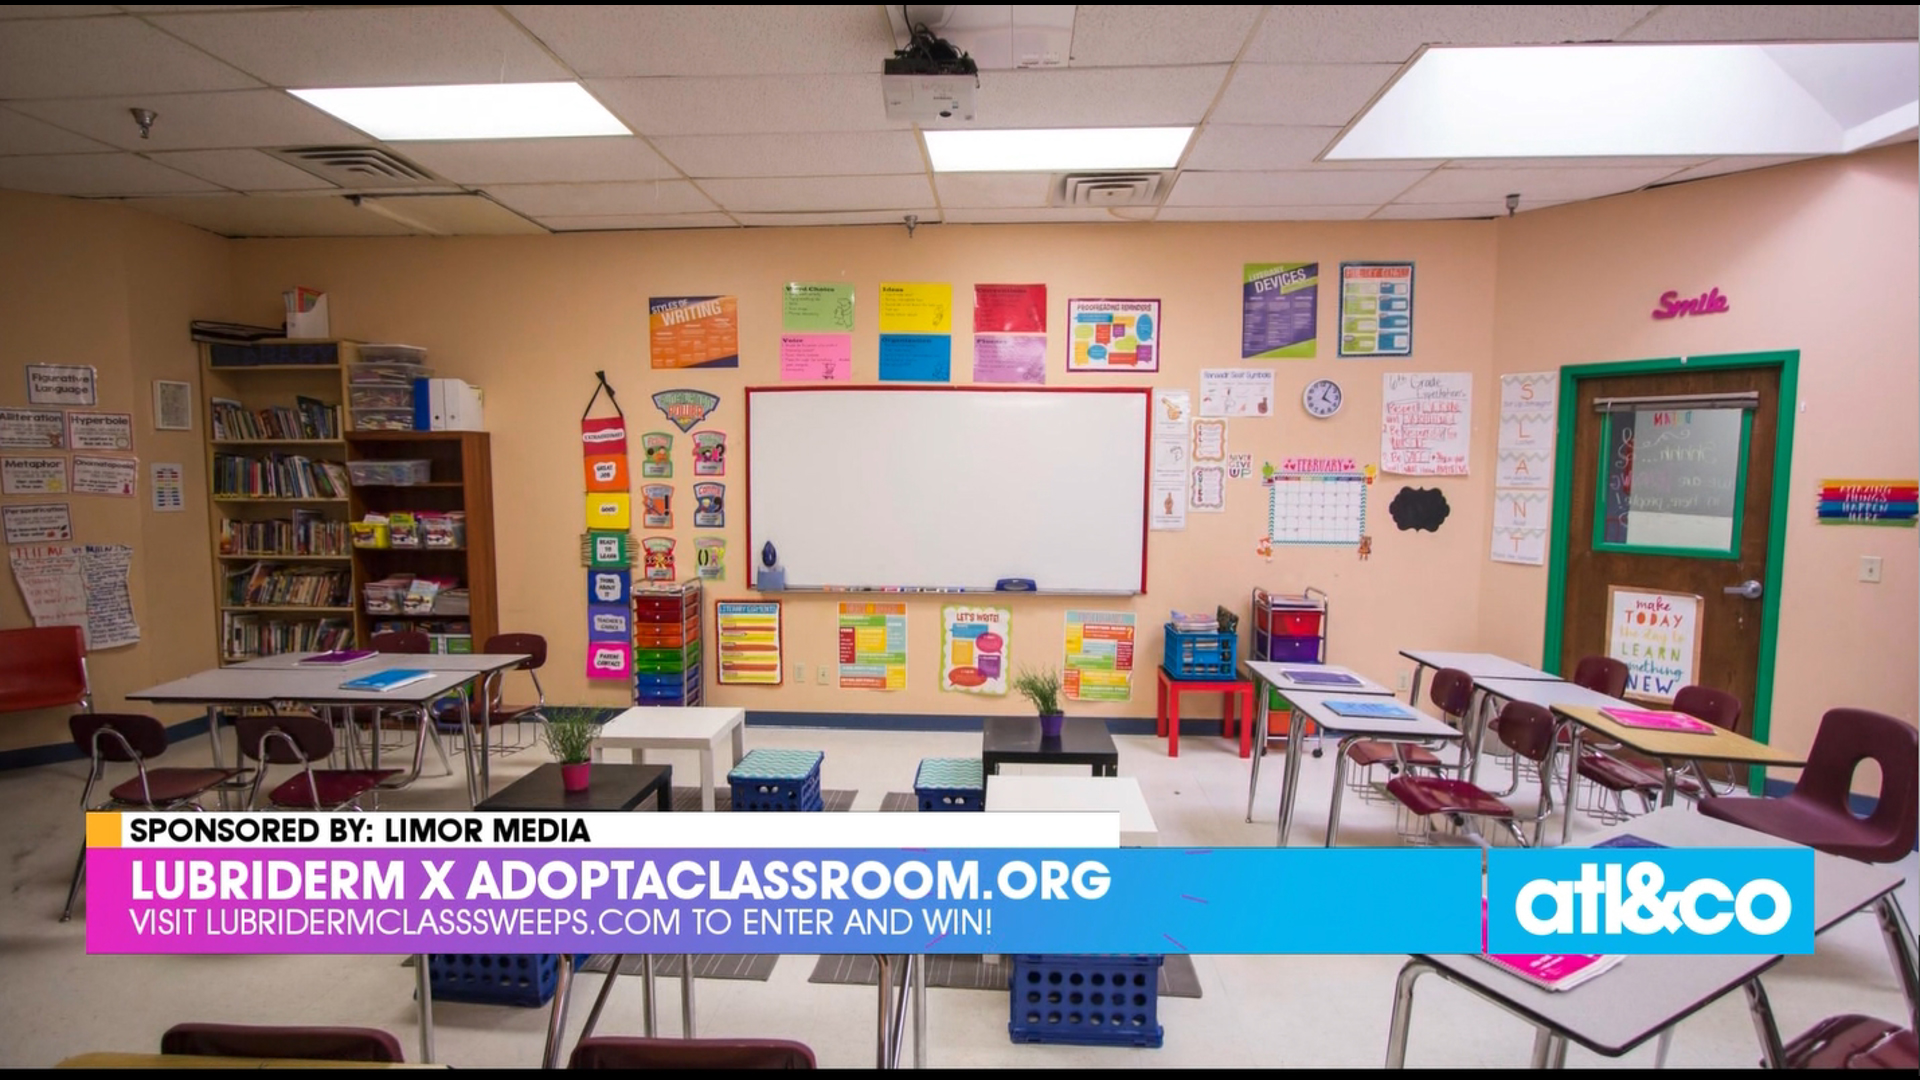 Enter for a chance to fully equip your classrom for the new school year with the Lubriderm x AdoptAClassroom.org Sweepstakes.